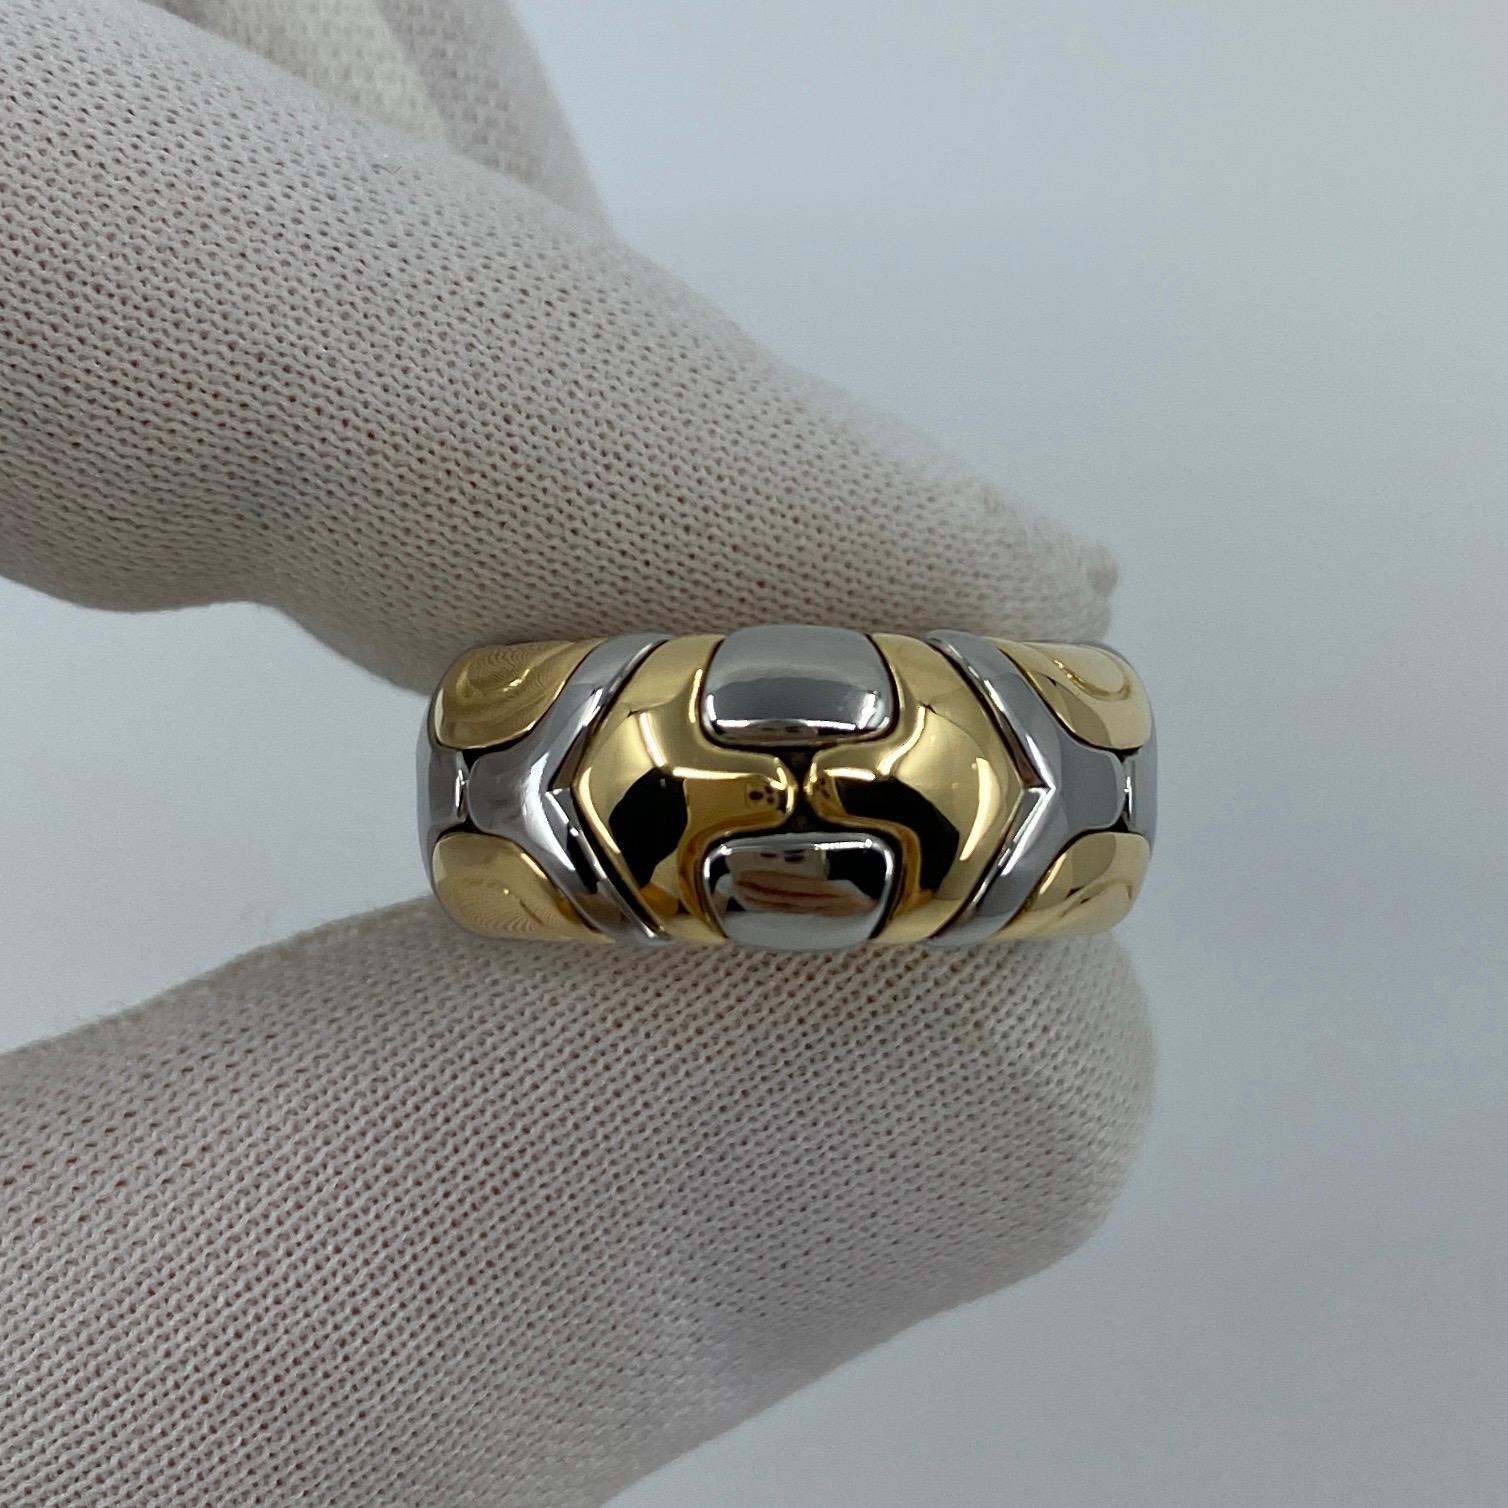 Very Rare Vintage Bvlgari Alveare 18 Karat Gold & Steel Spring Wide Band Ring.

A beautiful and rare vintage 18k yellow gold and stainless steel Bvlgari Alveare ring with flexible spring design.

This stylish and unique spring design allowing it to